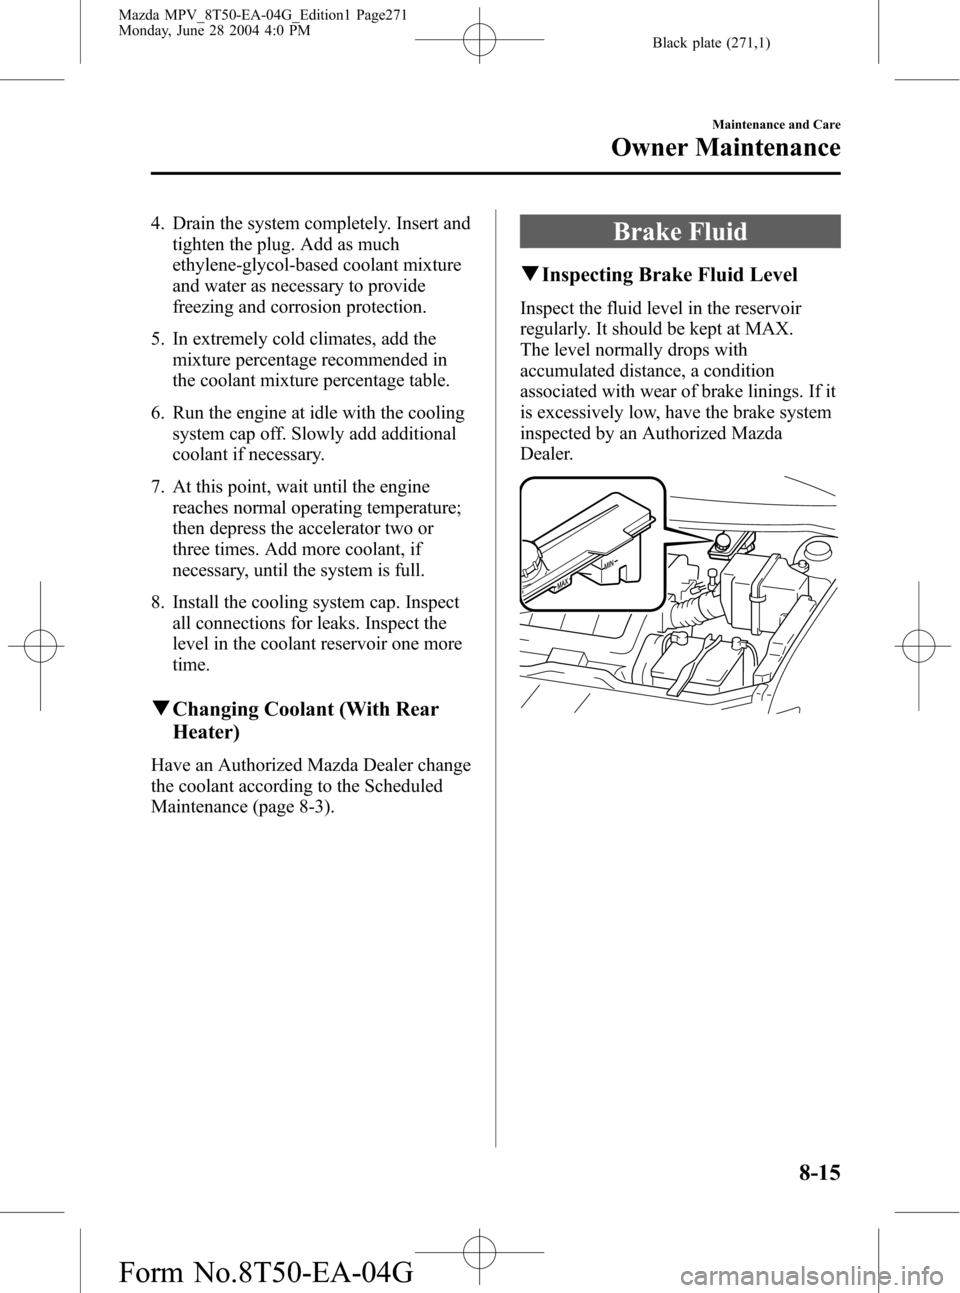 MAZDA MODEL MPV 2005  Owners Manual (in English) Black plate (271,1)
4. Drain the system completely. Insert and
tighten the plug. Add as much
ethylene-glycol-based coolant mixture
and water as necessary to provide
freezing and corrosion protection.
